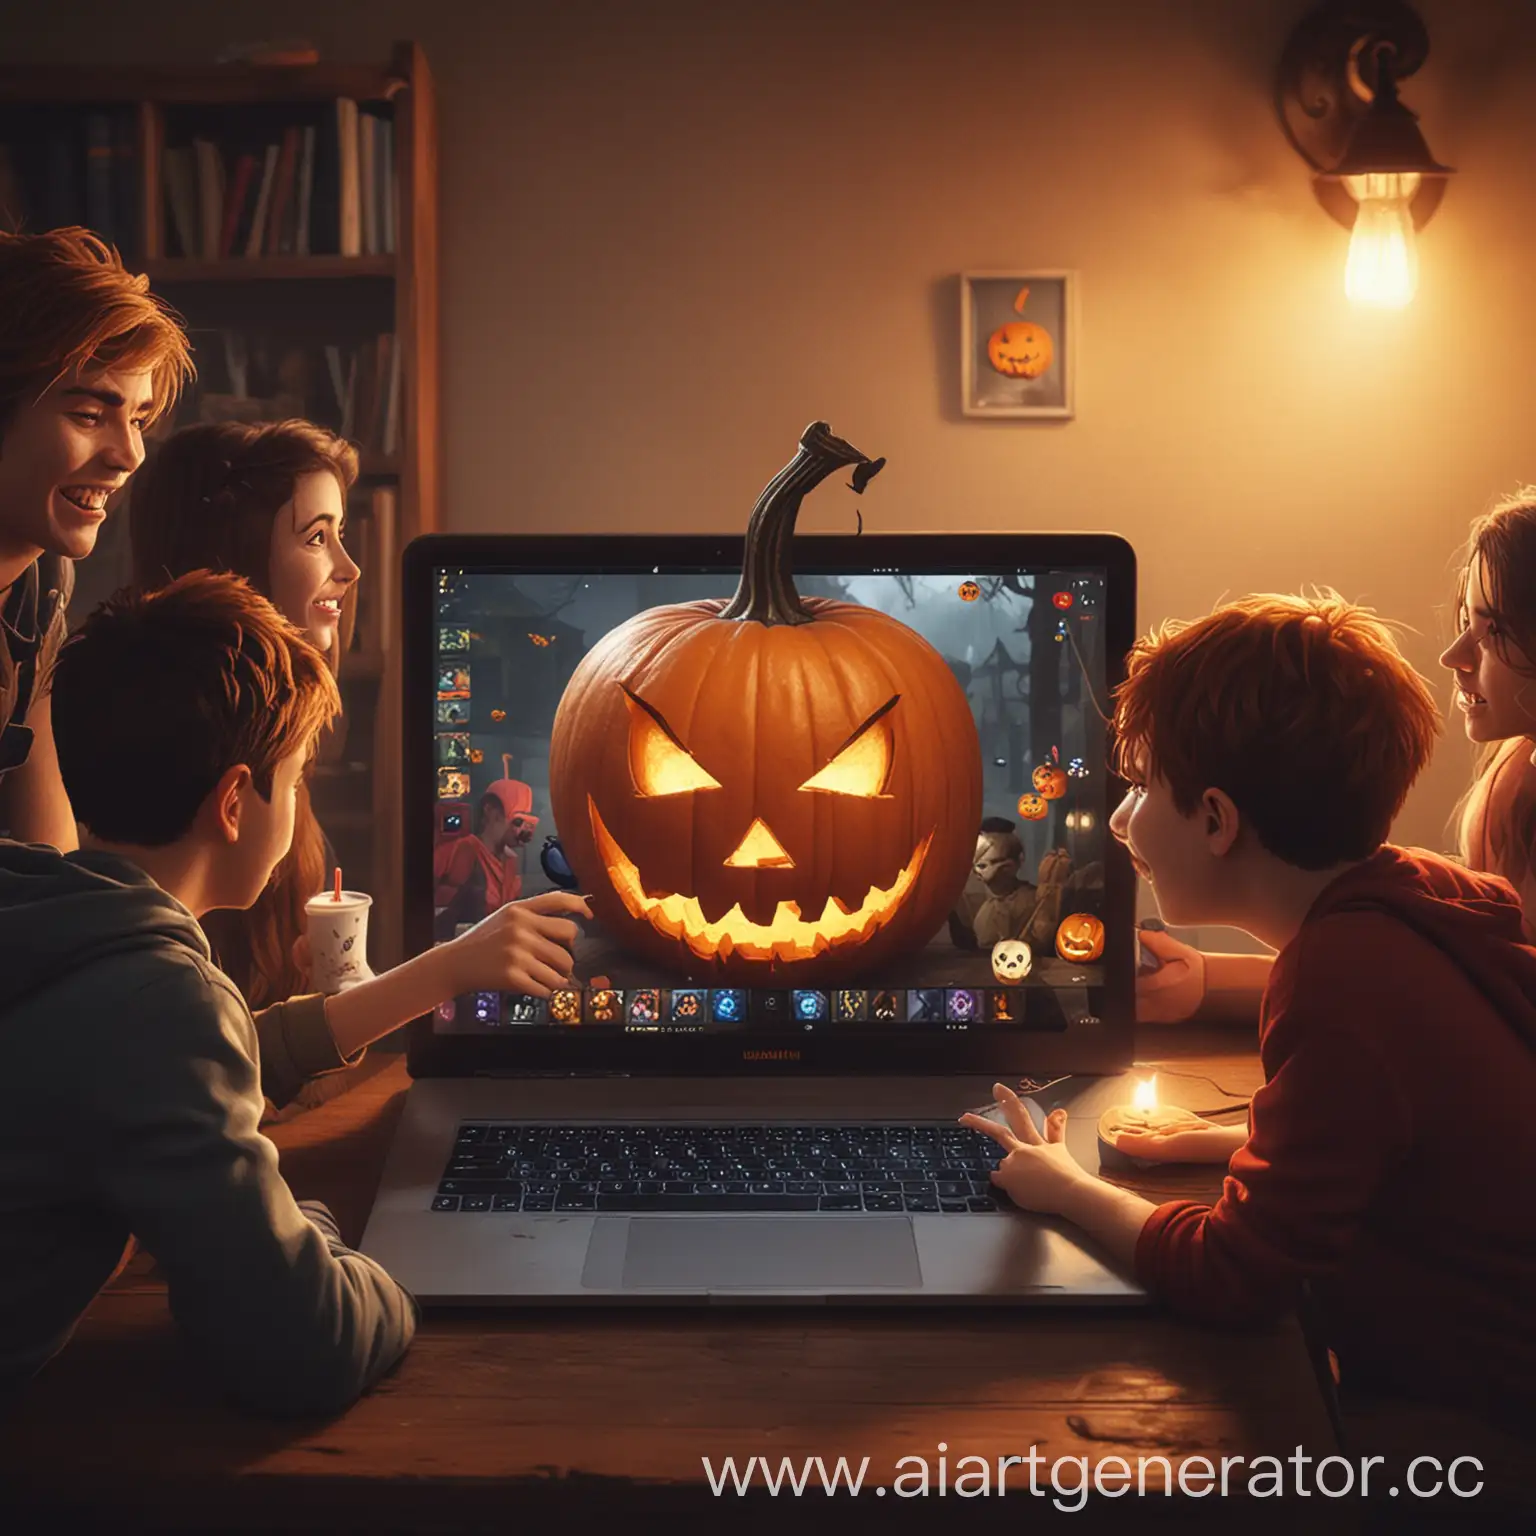 Pumpkin-Jack-Engages-in-Online-Gaming-Fun-with-Friends